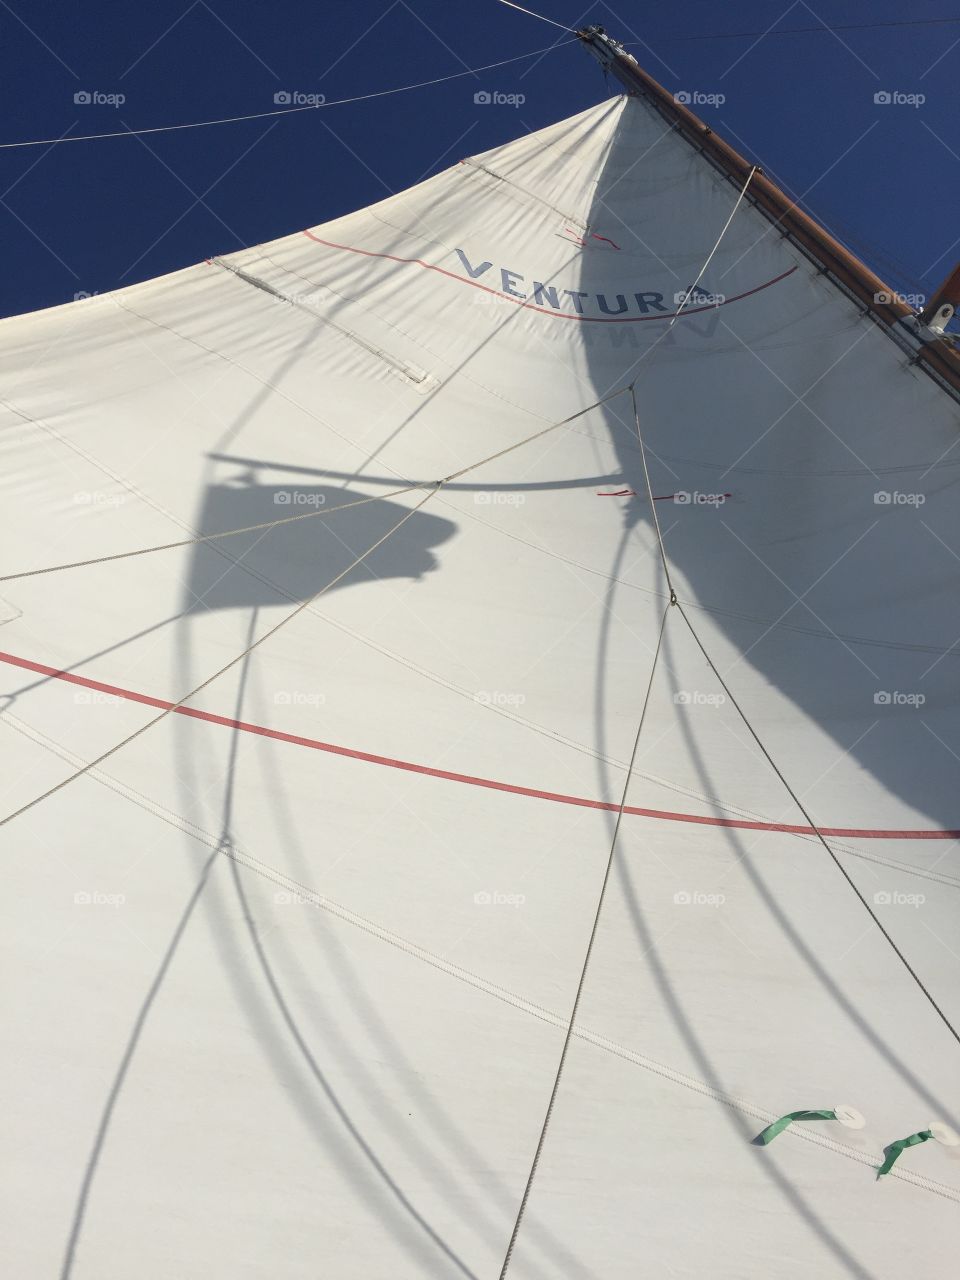 Accented summer shadows on this exclusive boat sail 